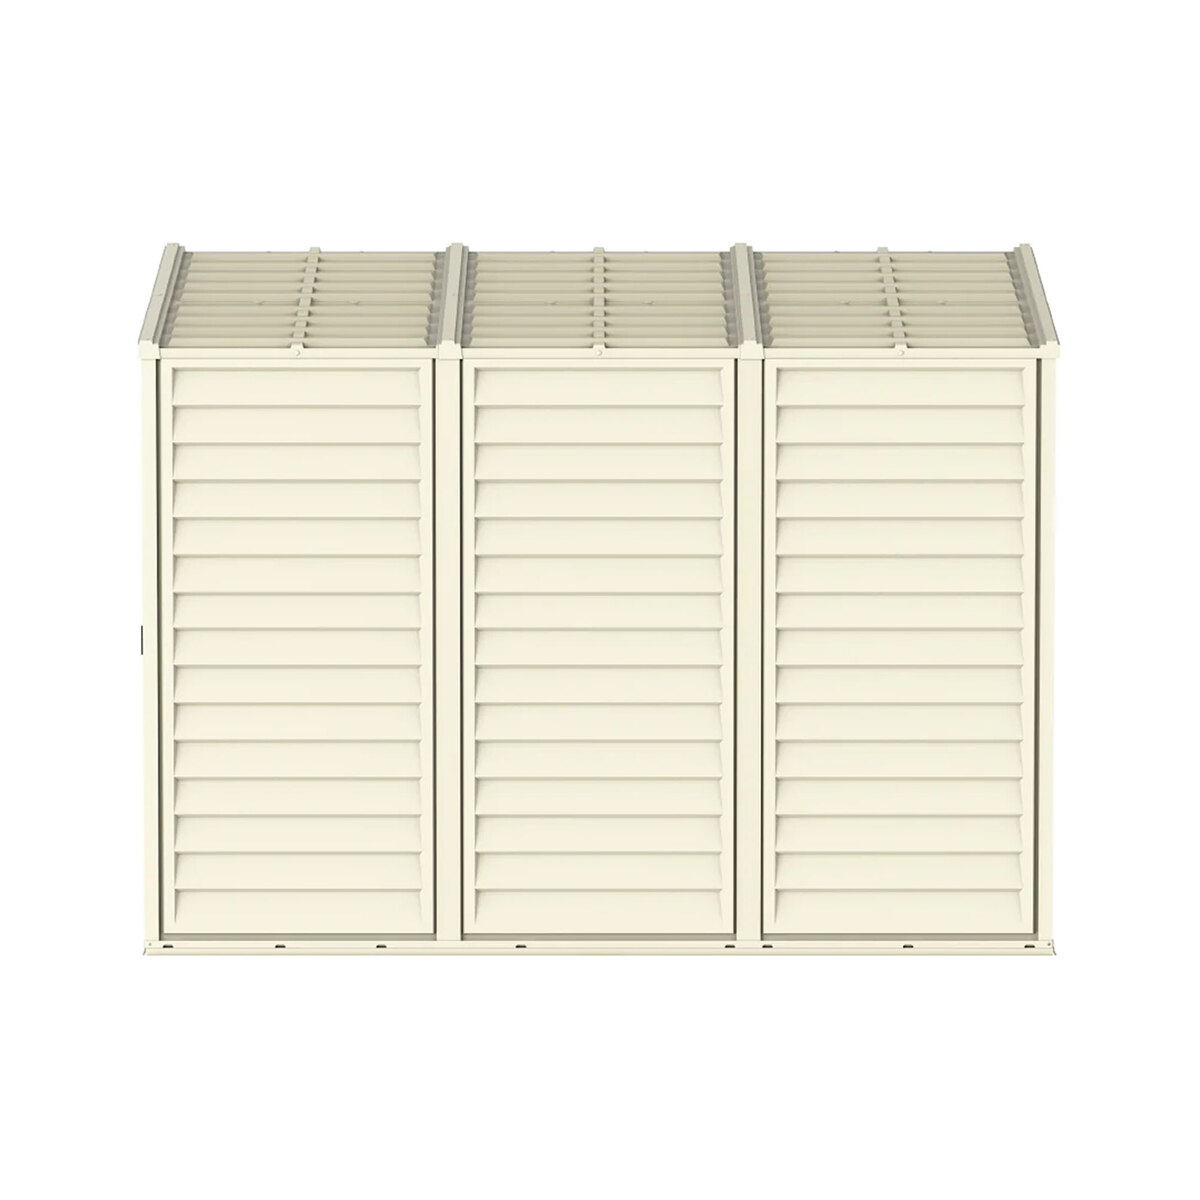 Cosmoplast Sidemate Resin Storage Shed HFGSHD06625-2EX 4x8FT 241.7x122x187.4cm